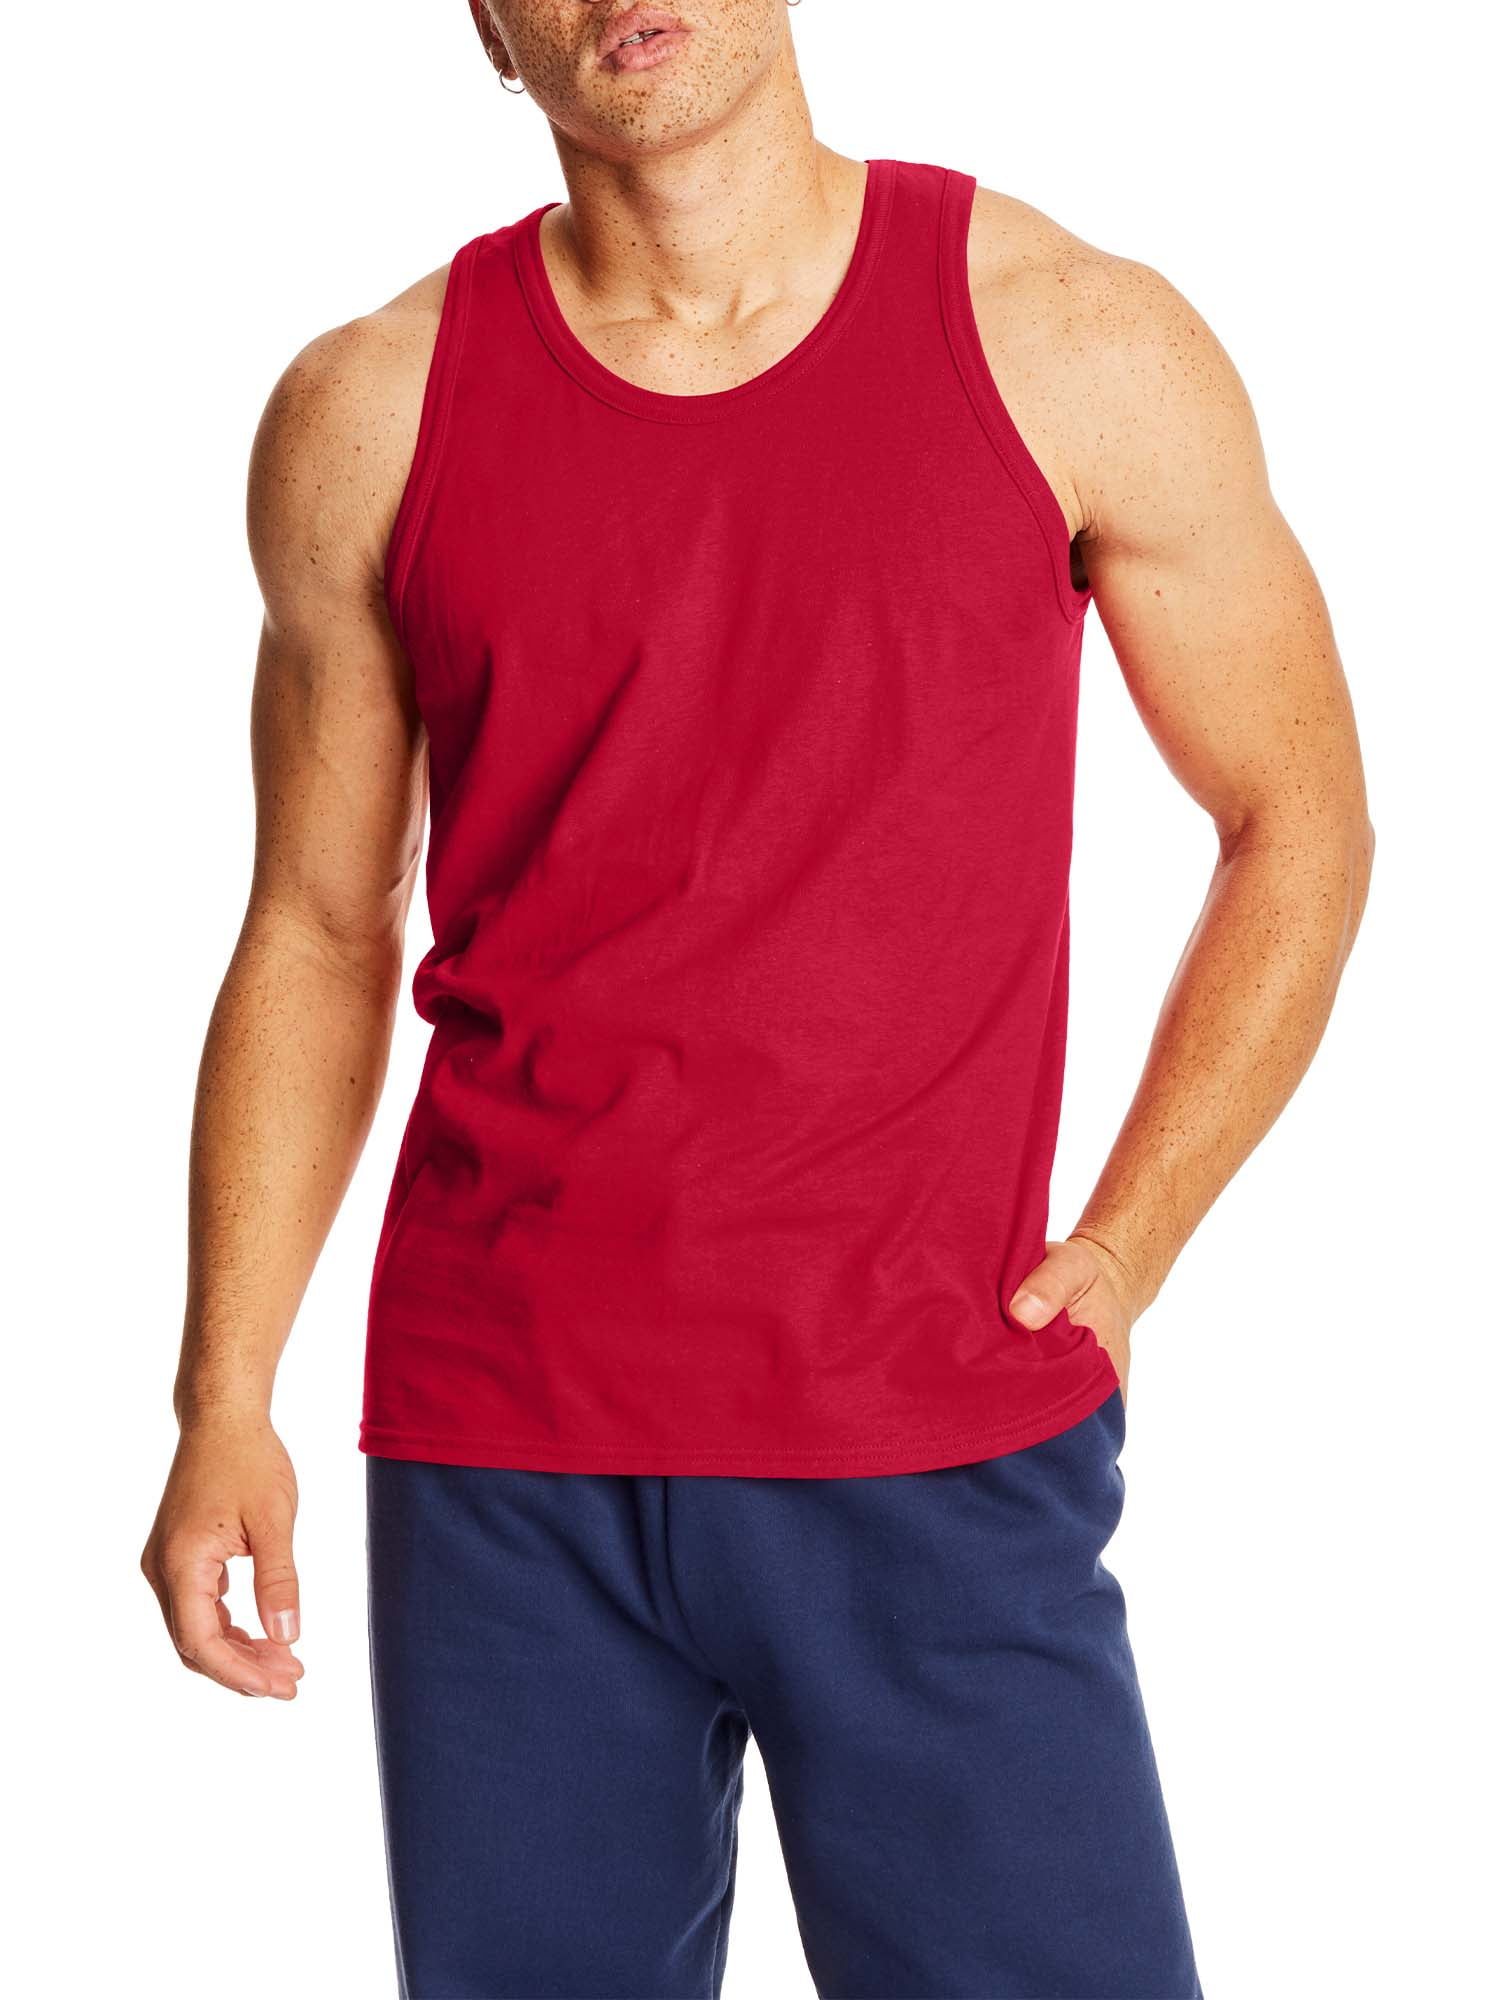 Hanes Men's Red Label Dyed Tanks 2 Pack Blk/Grey, S-Assorted